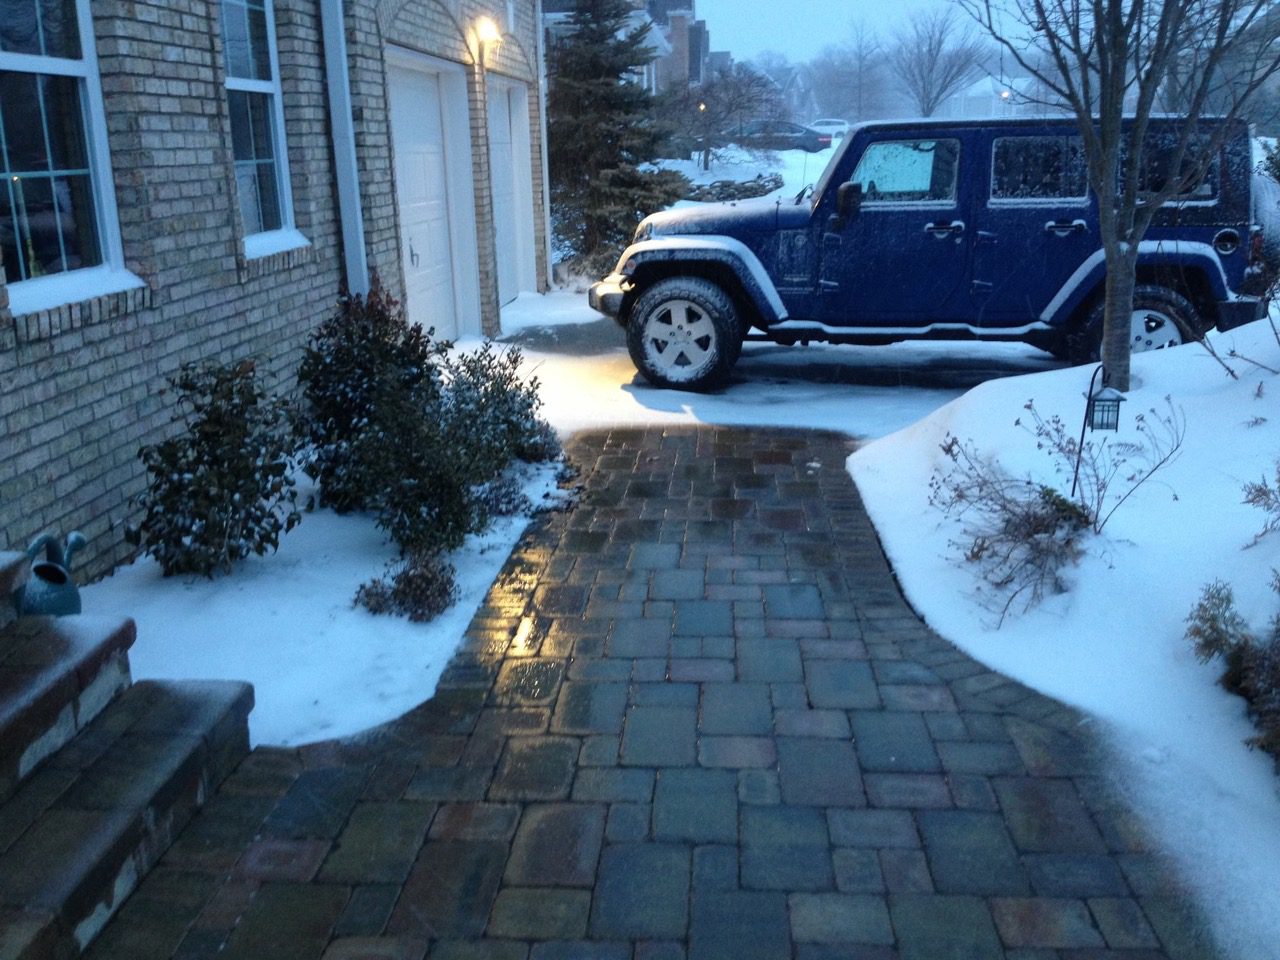 A blue jeep parked in the driveway of a house.